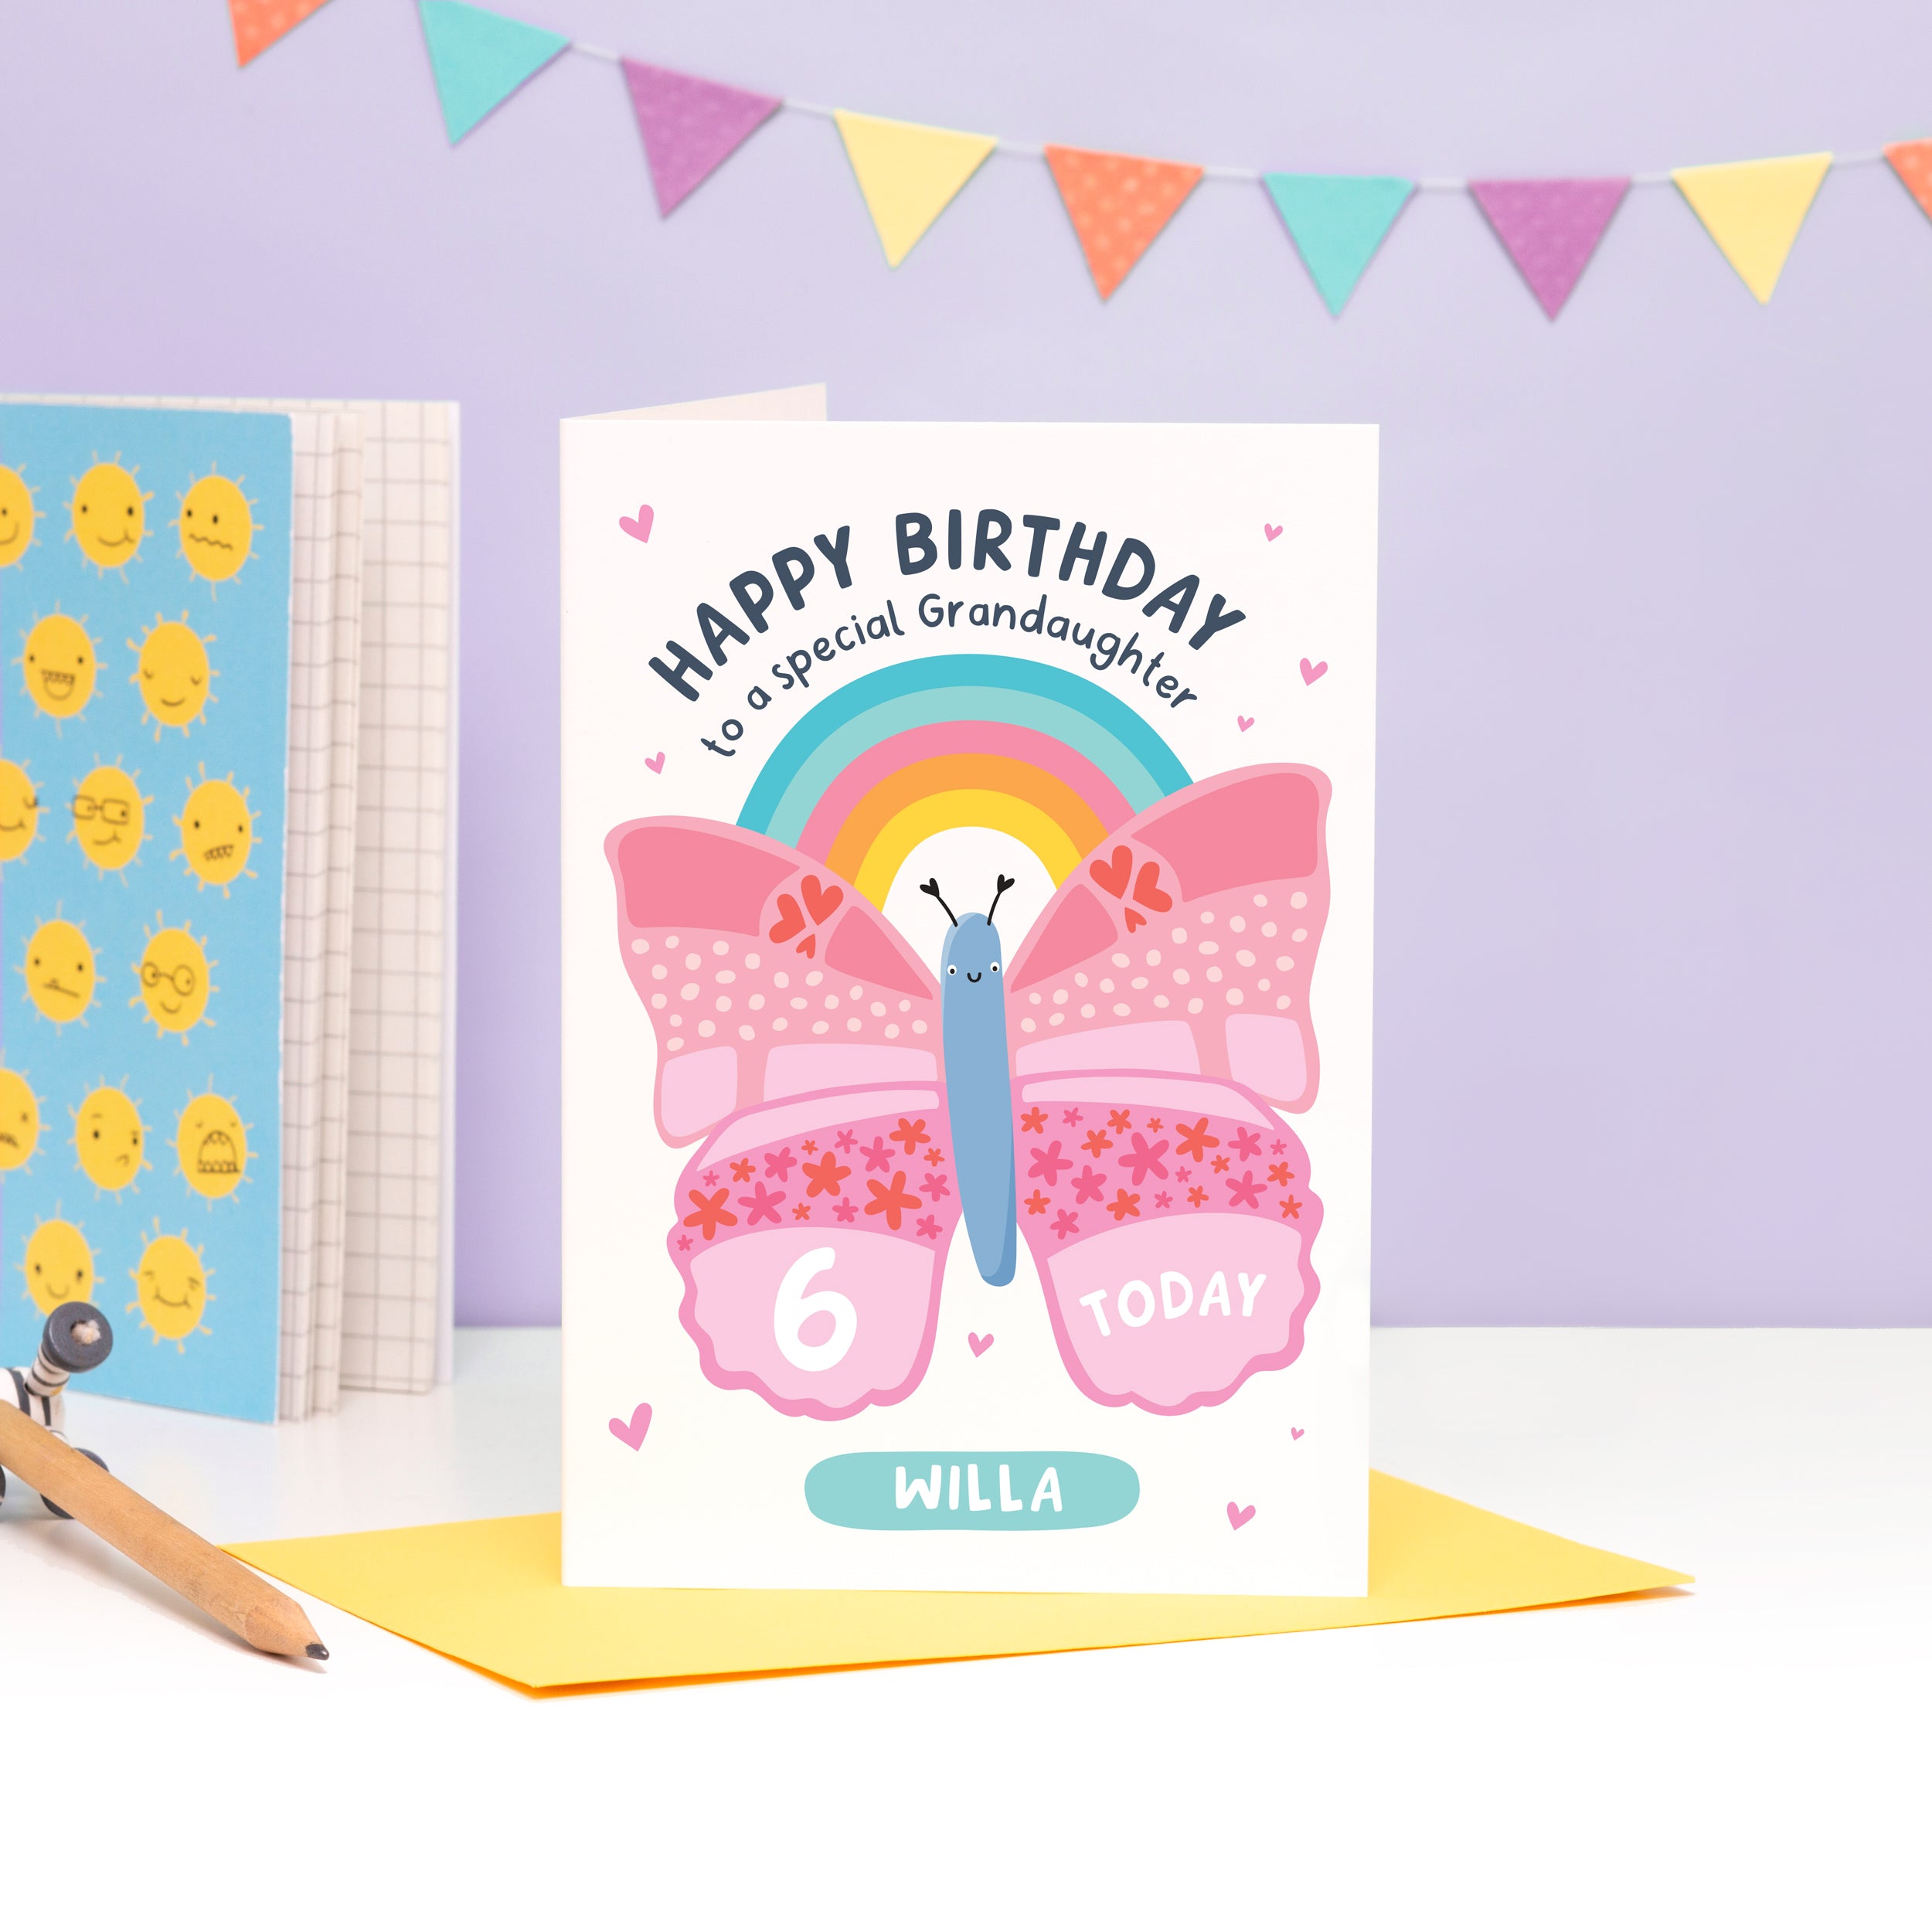 A cute and colourful card featuring an illustration of a butterfly and rainbow with the words 'happy birthday to a special granddaughter' with space to personalise with a name and age.